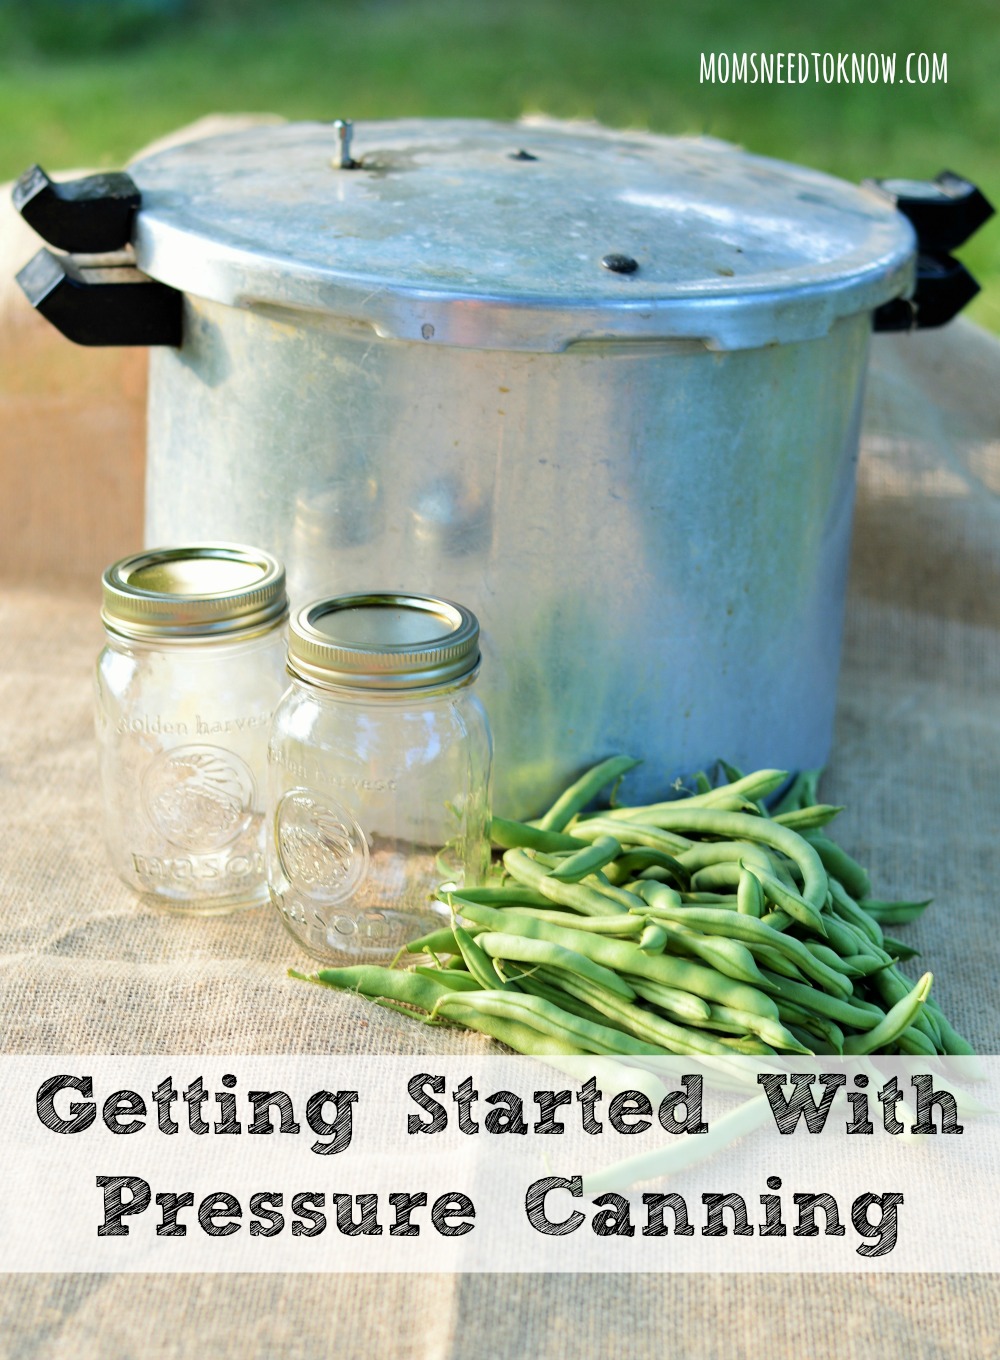 Getting Started With Pressure Canning